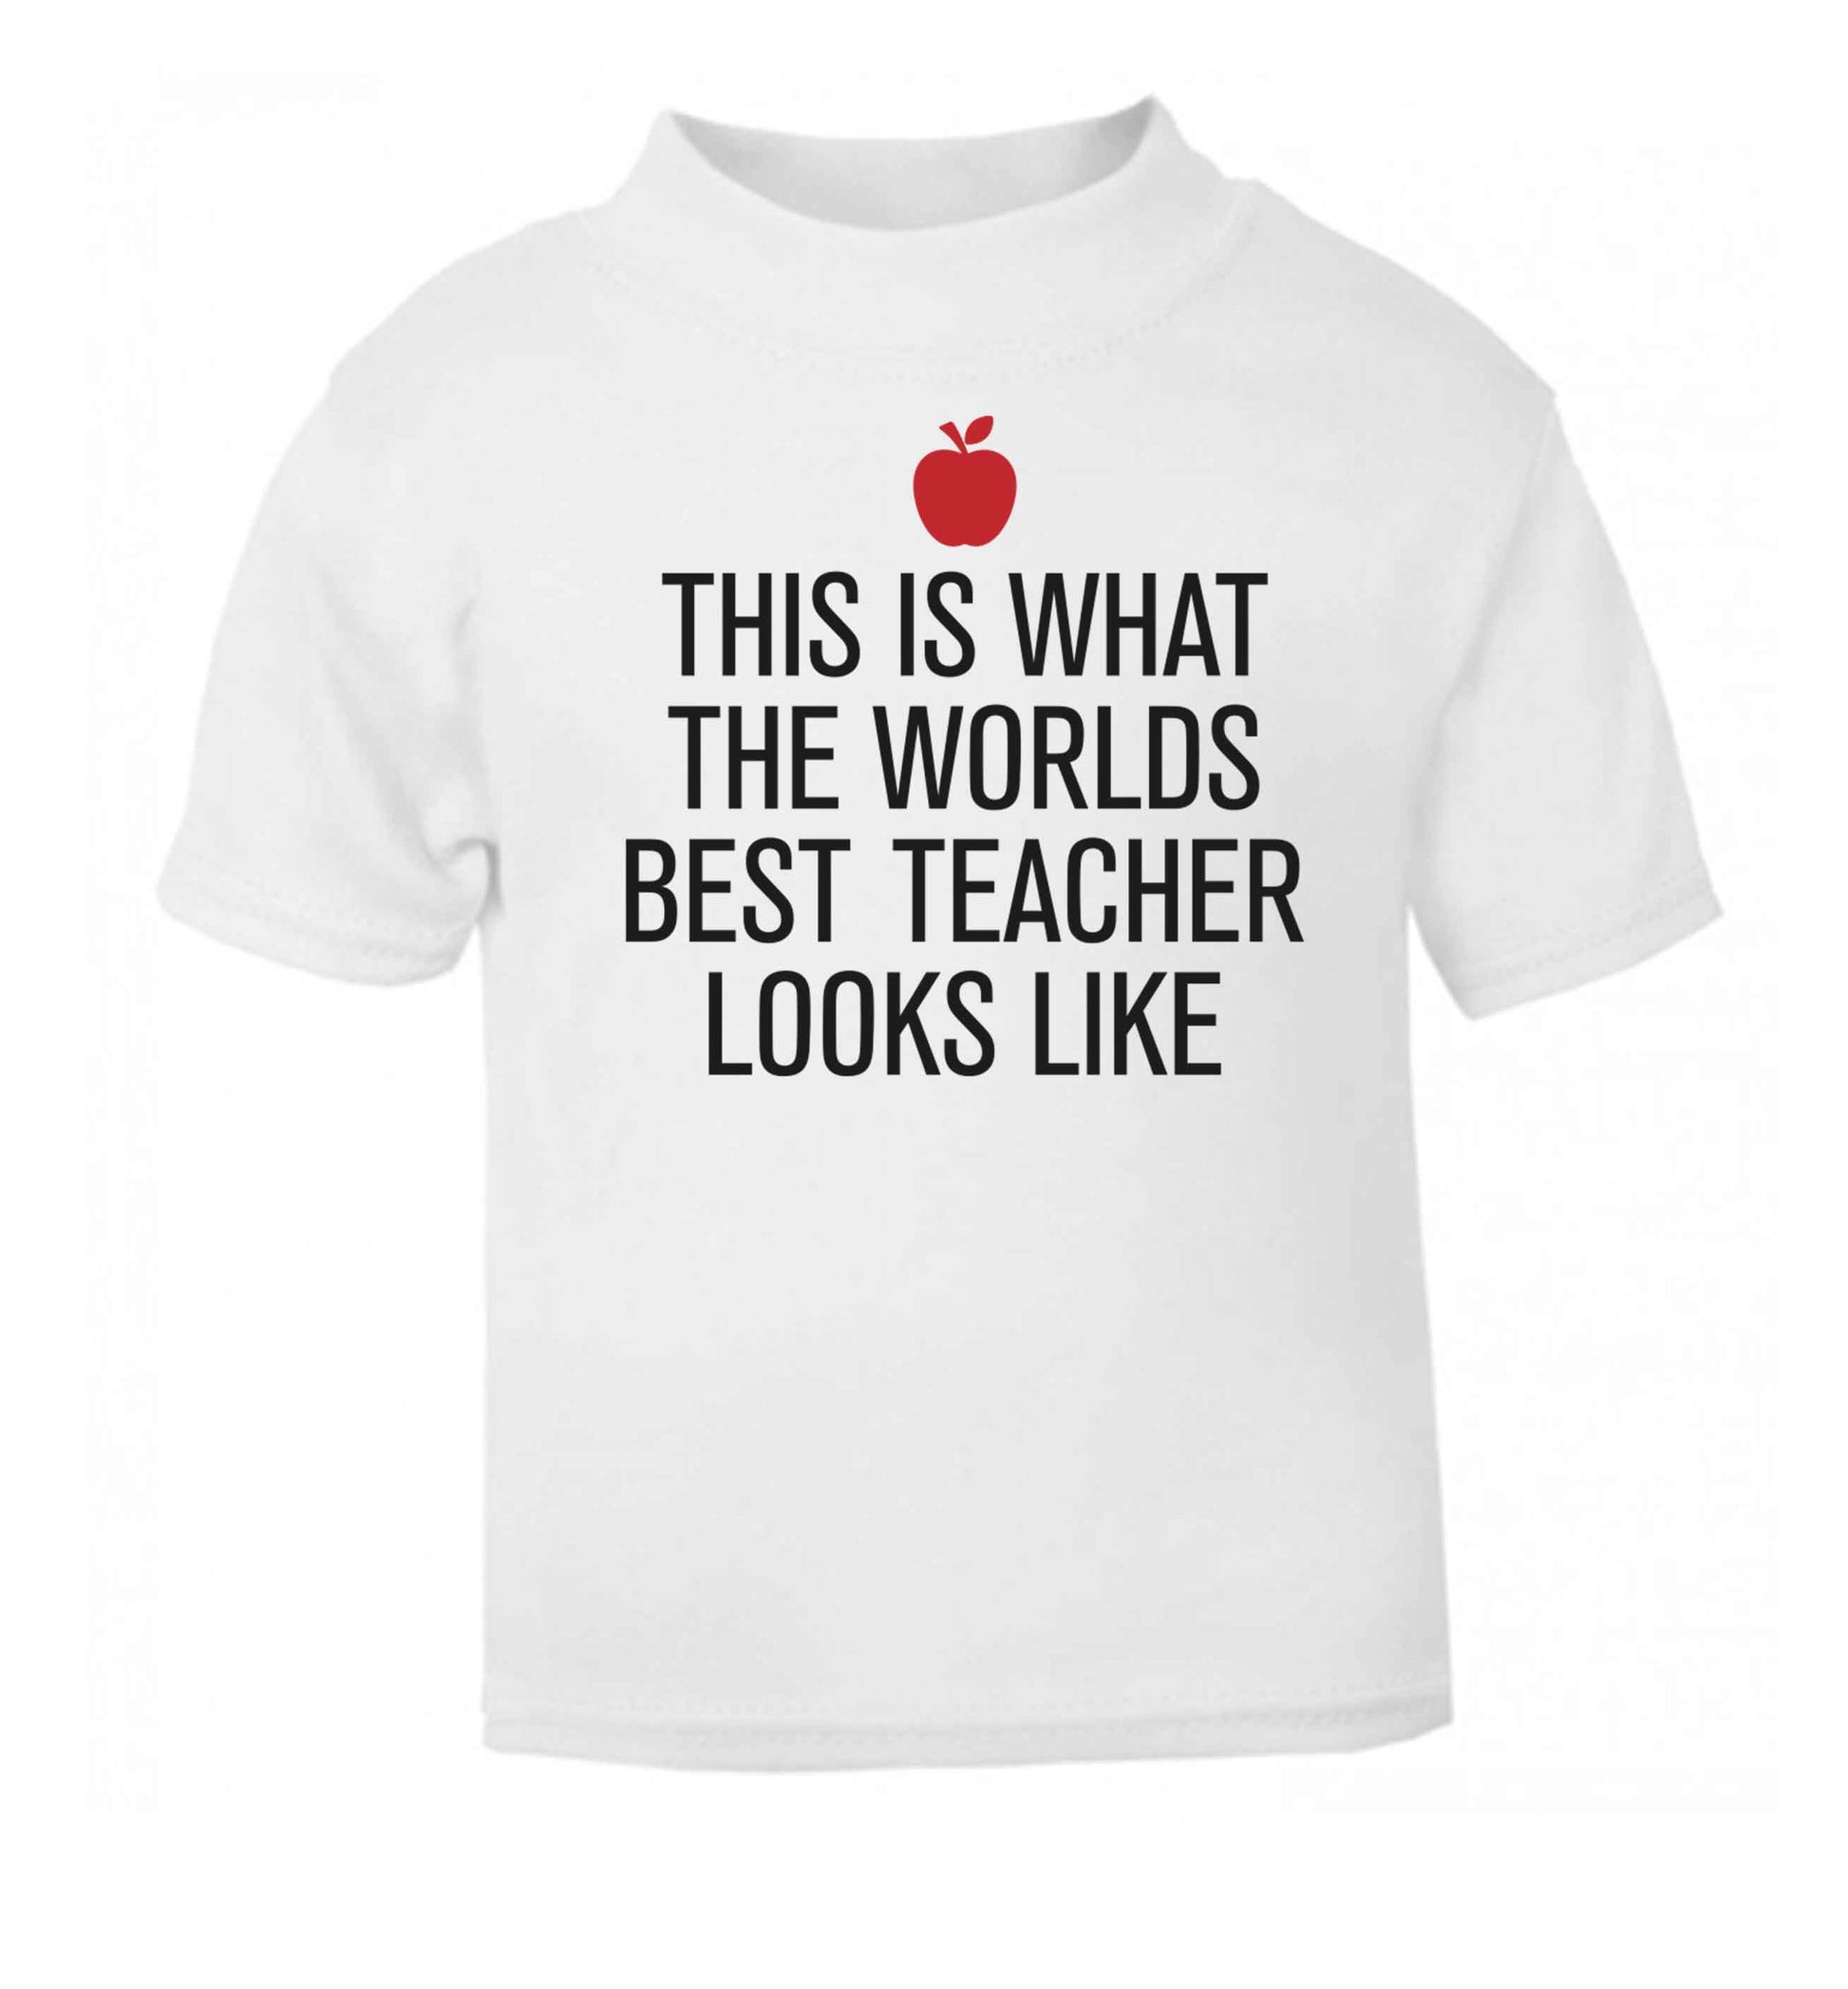 This is what the worlds best teacher looks like white baby toddler Tshirt 2 Years